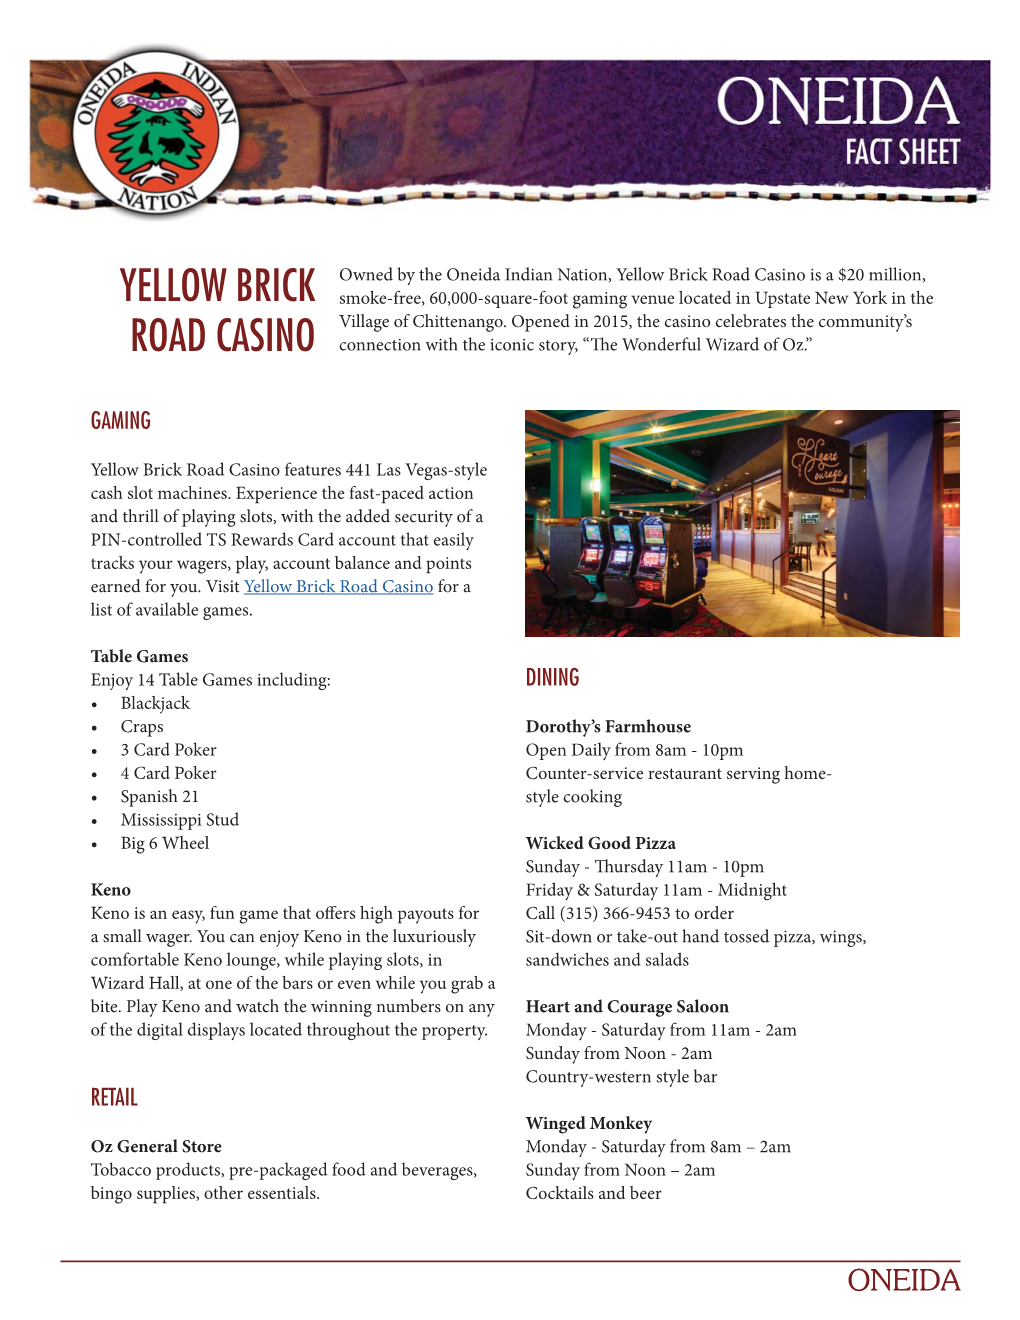 Yellow Brick Road Casino Fact Sheet for Web 2017.Indd